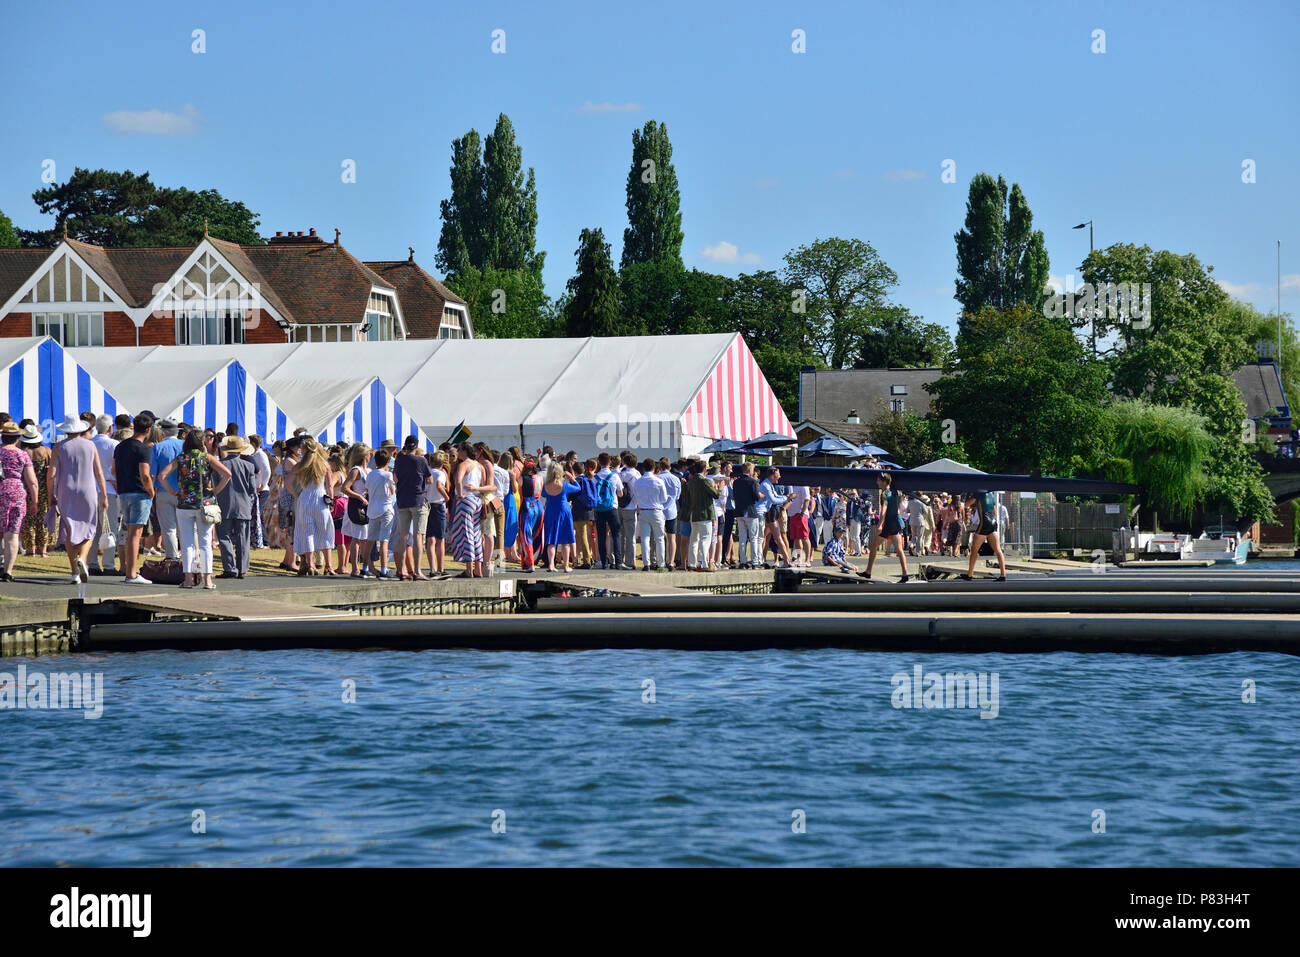 Following the finals of the Fawley Challenge Cup at Henley Royal Regatta friends and family welcome back the  The Windsor Boy's School winning crew where their time of 6.27 smashed the course record by seven seconds. Credit Wendy Johnson/Alamy Live News Stock Photo